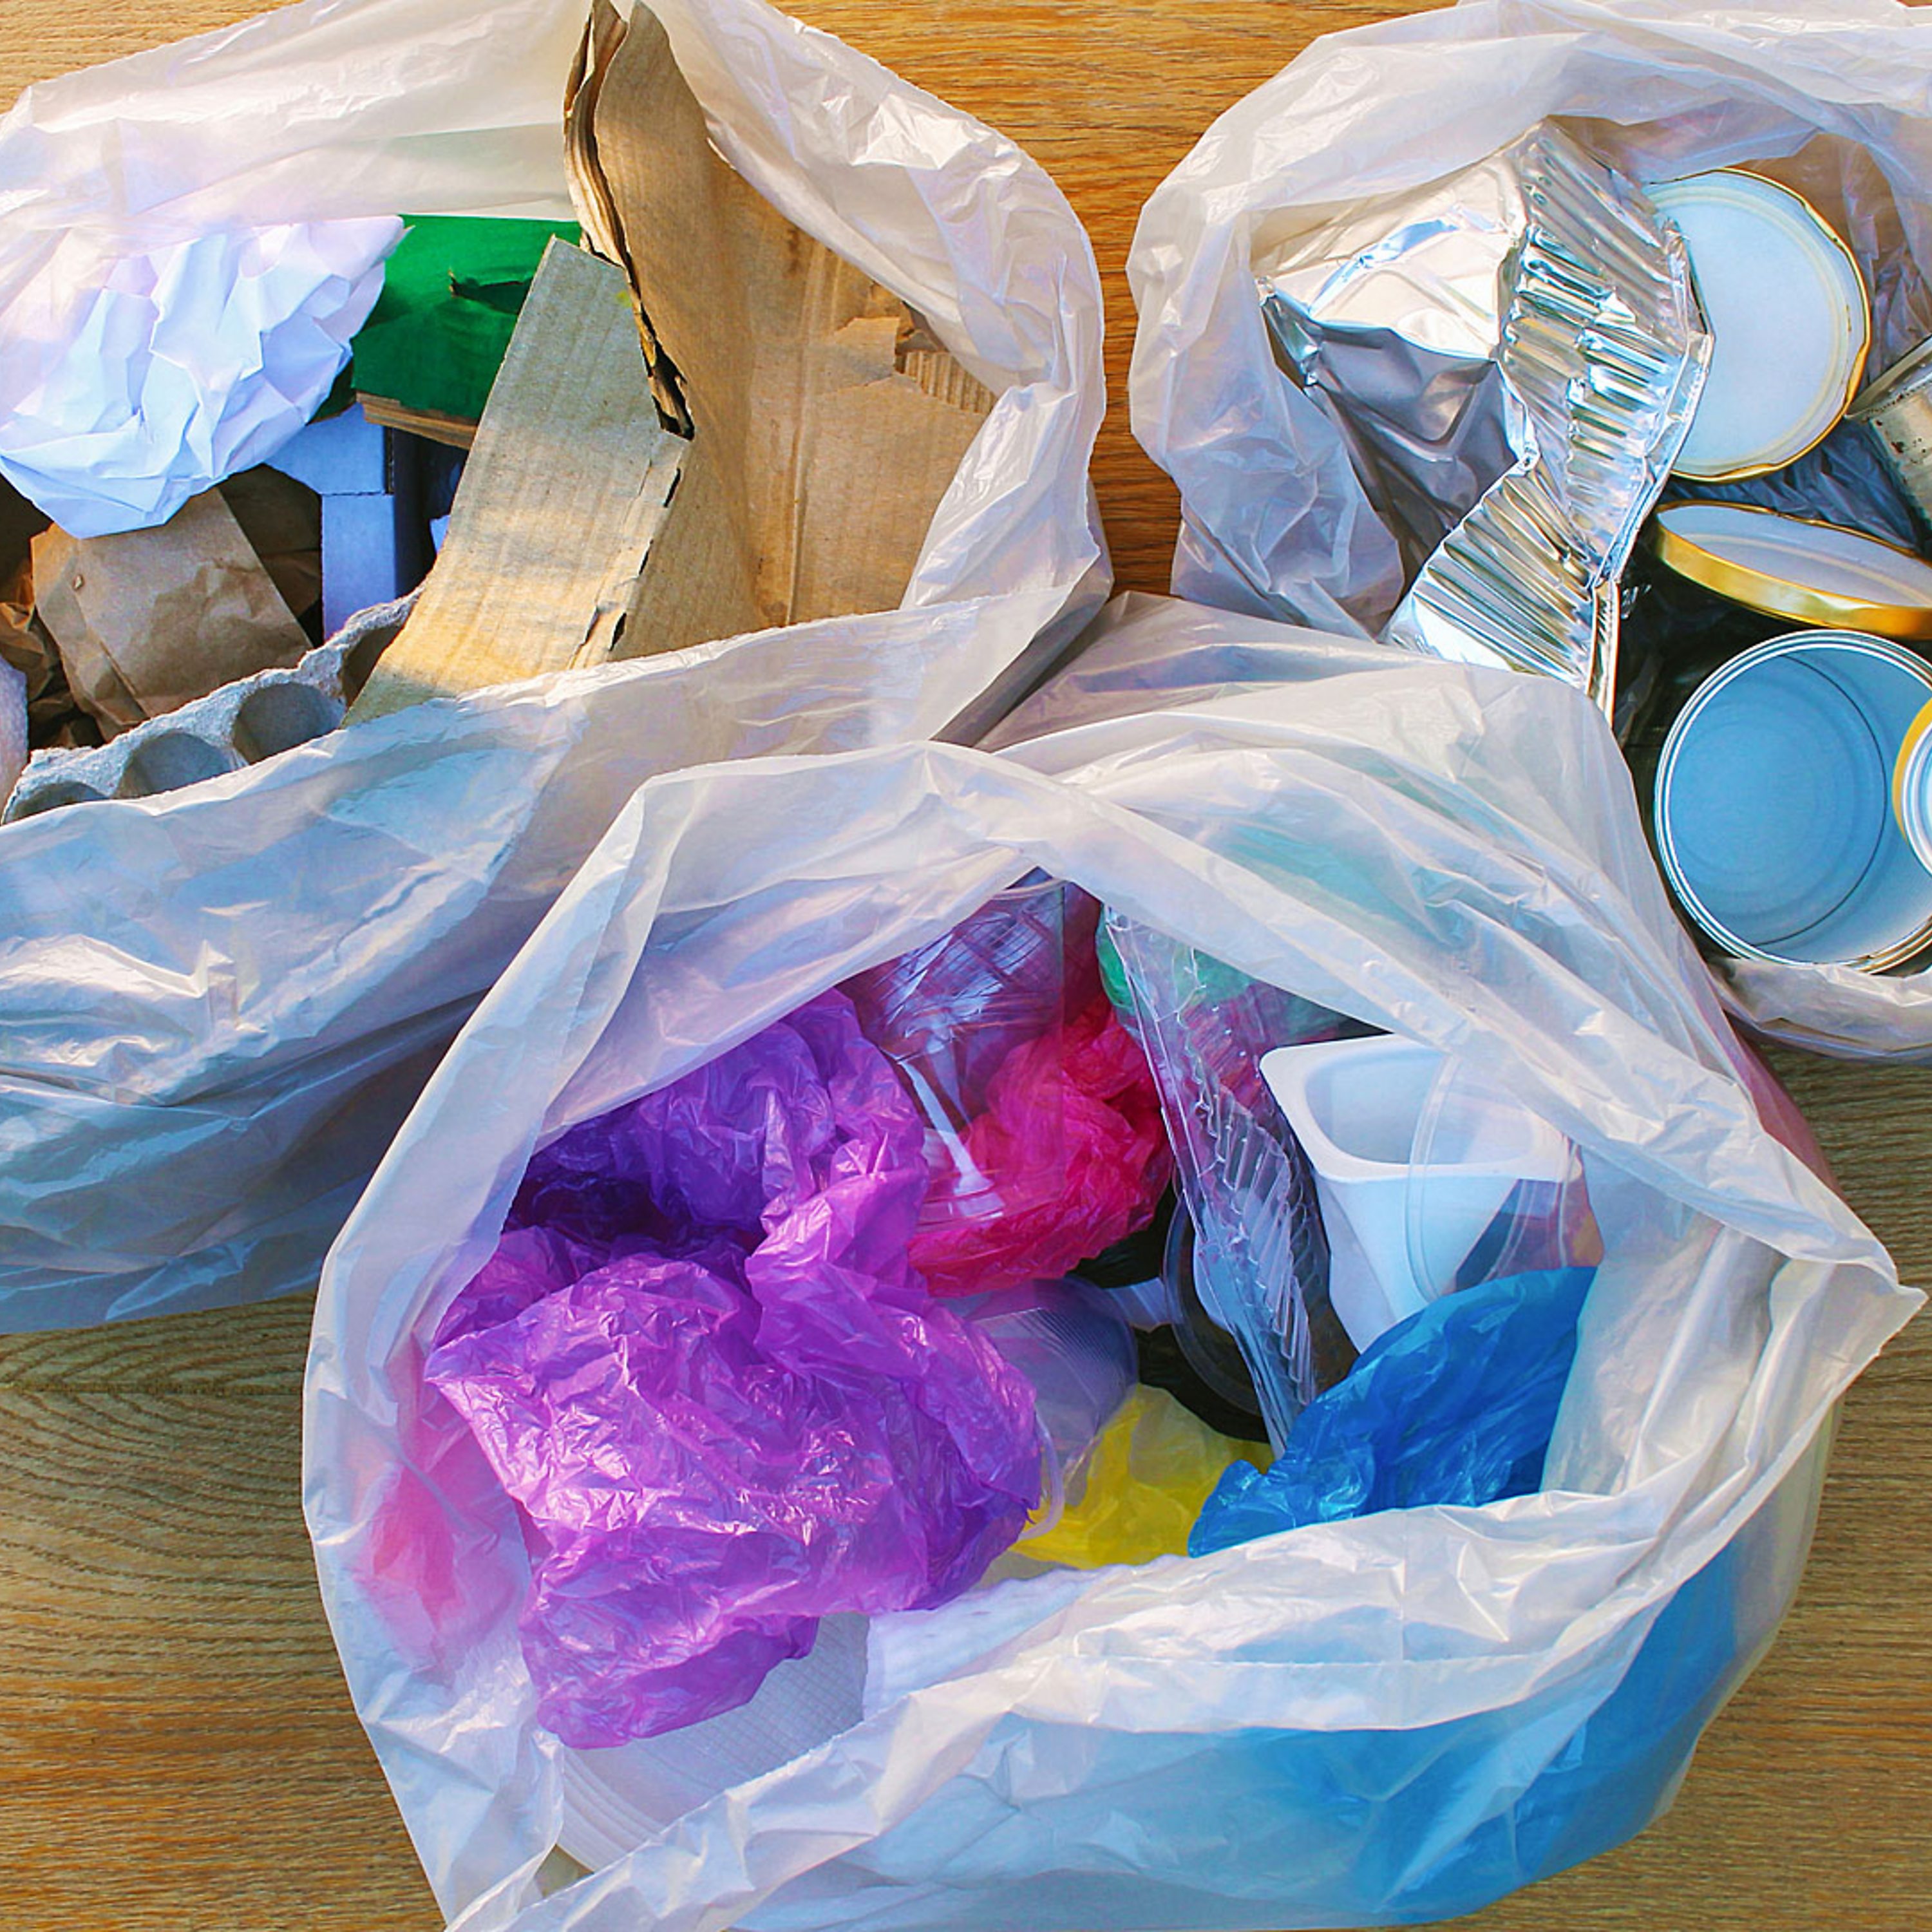 Is Recycling All Our Waste at Home Possible?